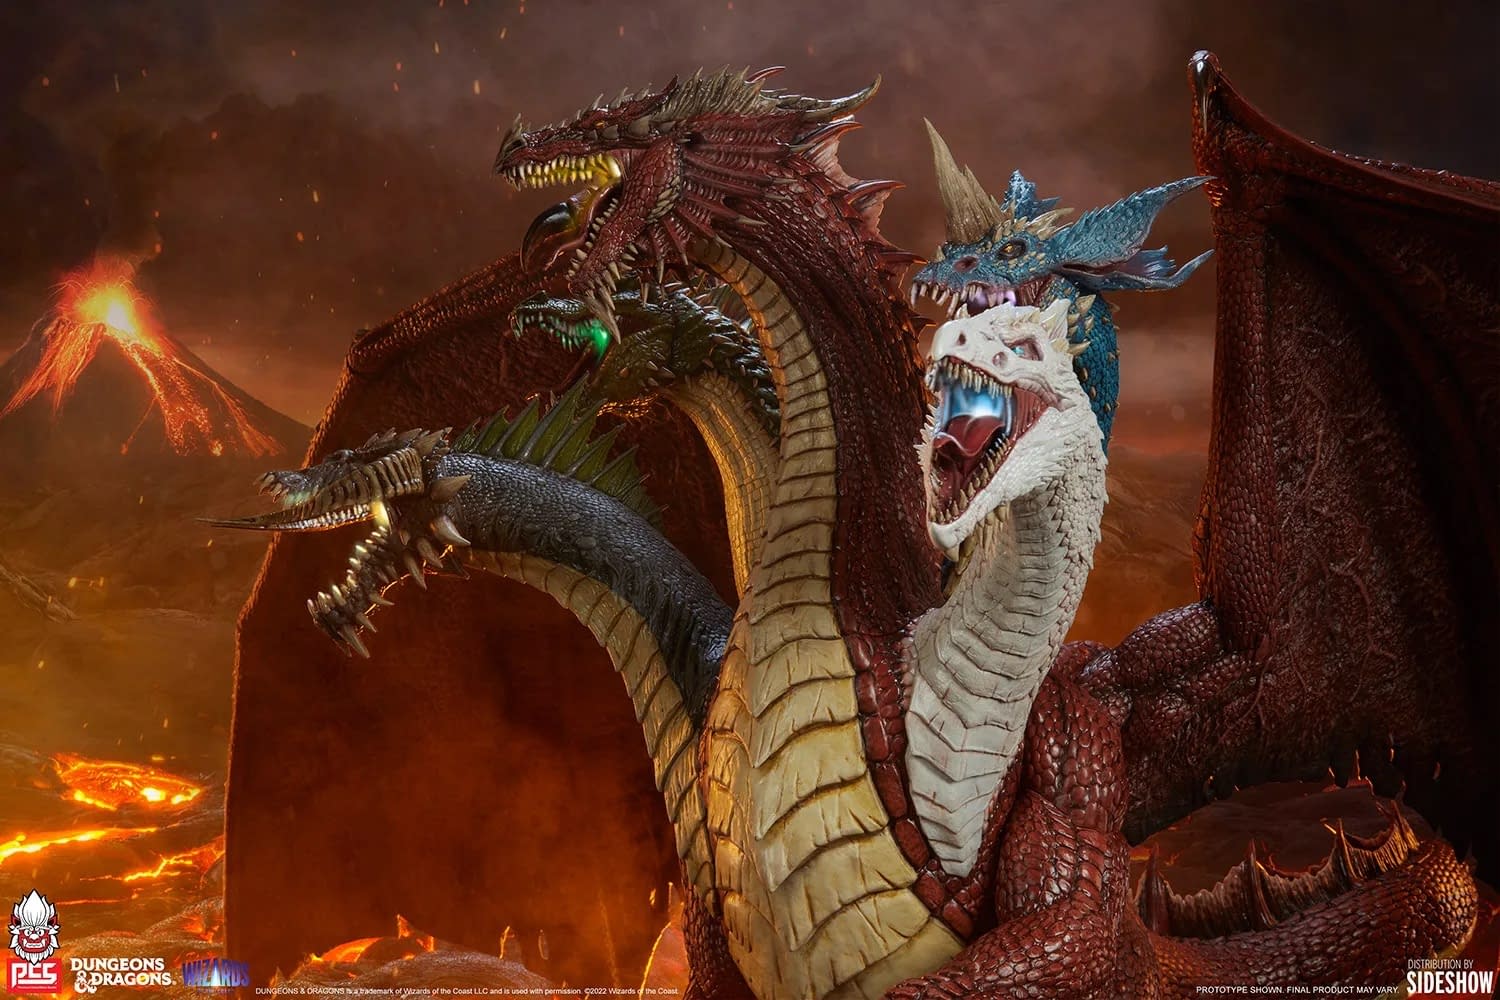 Dungeons & Dragons Tiamat Rises to Power with Incredible PCS Statue